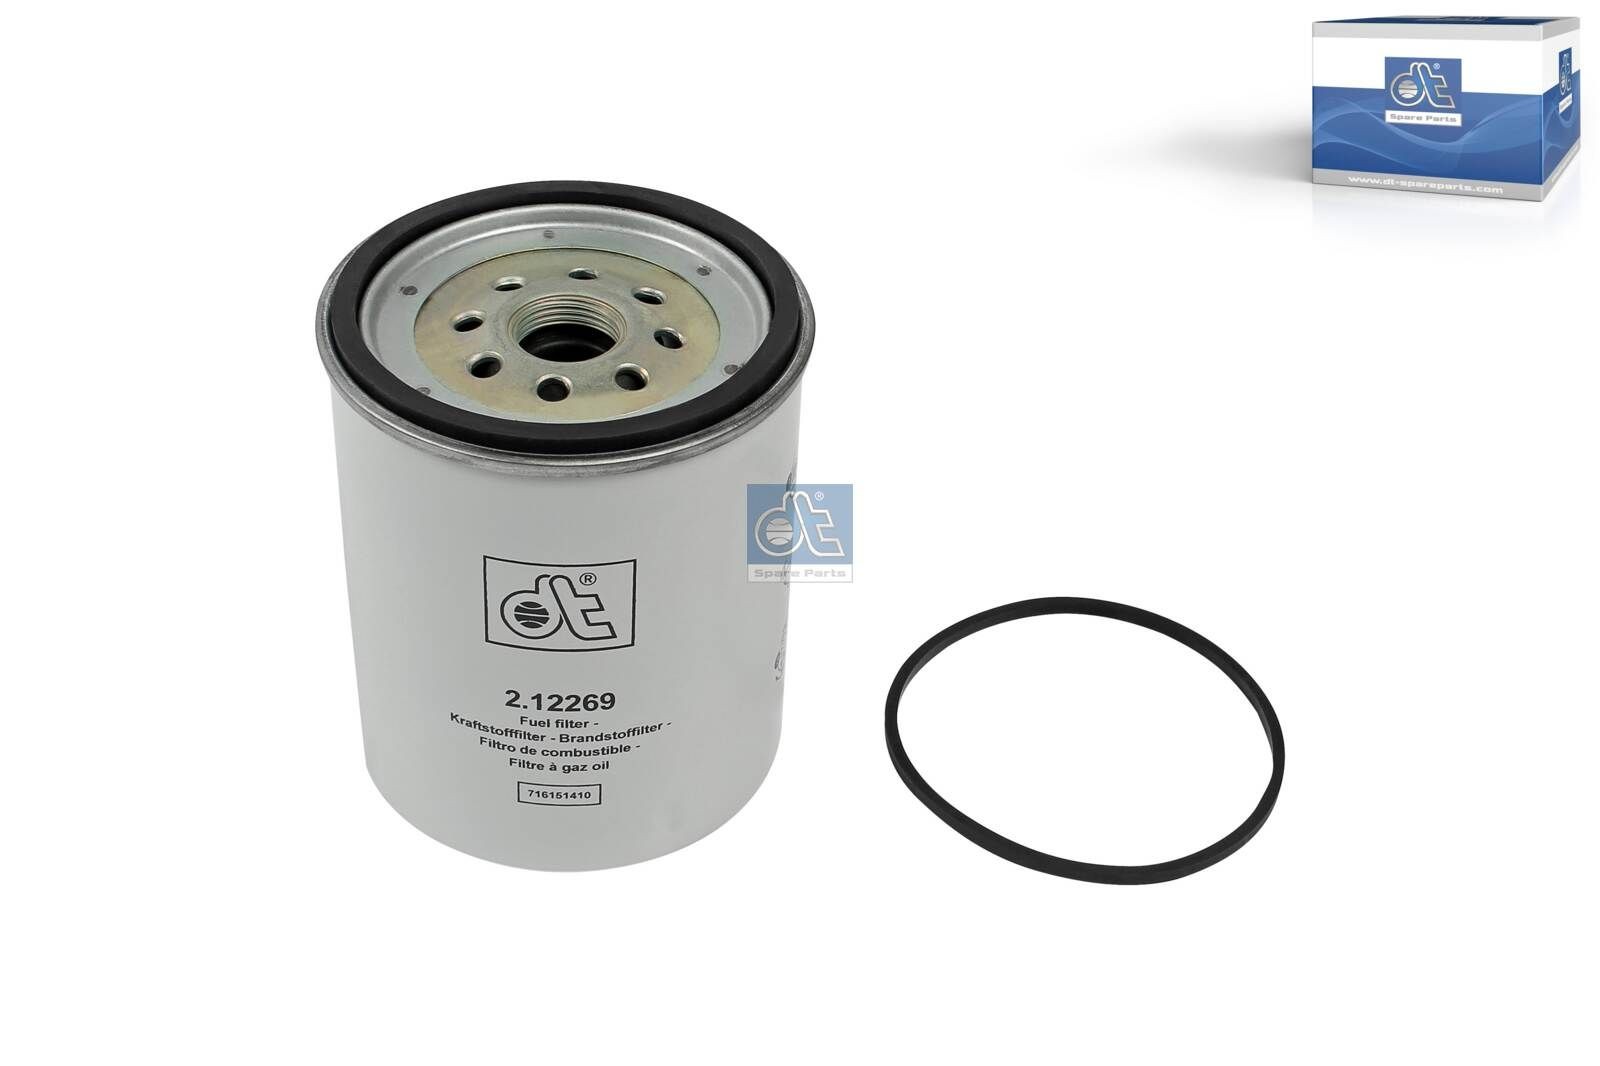 WK 1040/1 x DT Spare Parts 2.12269 Fuel filter 2 0853 583